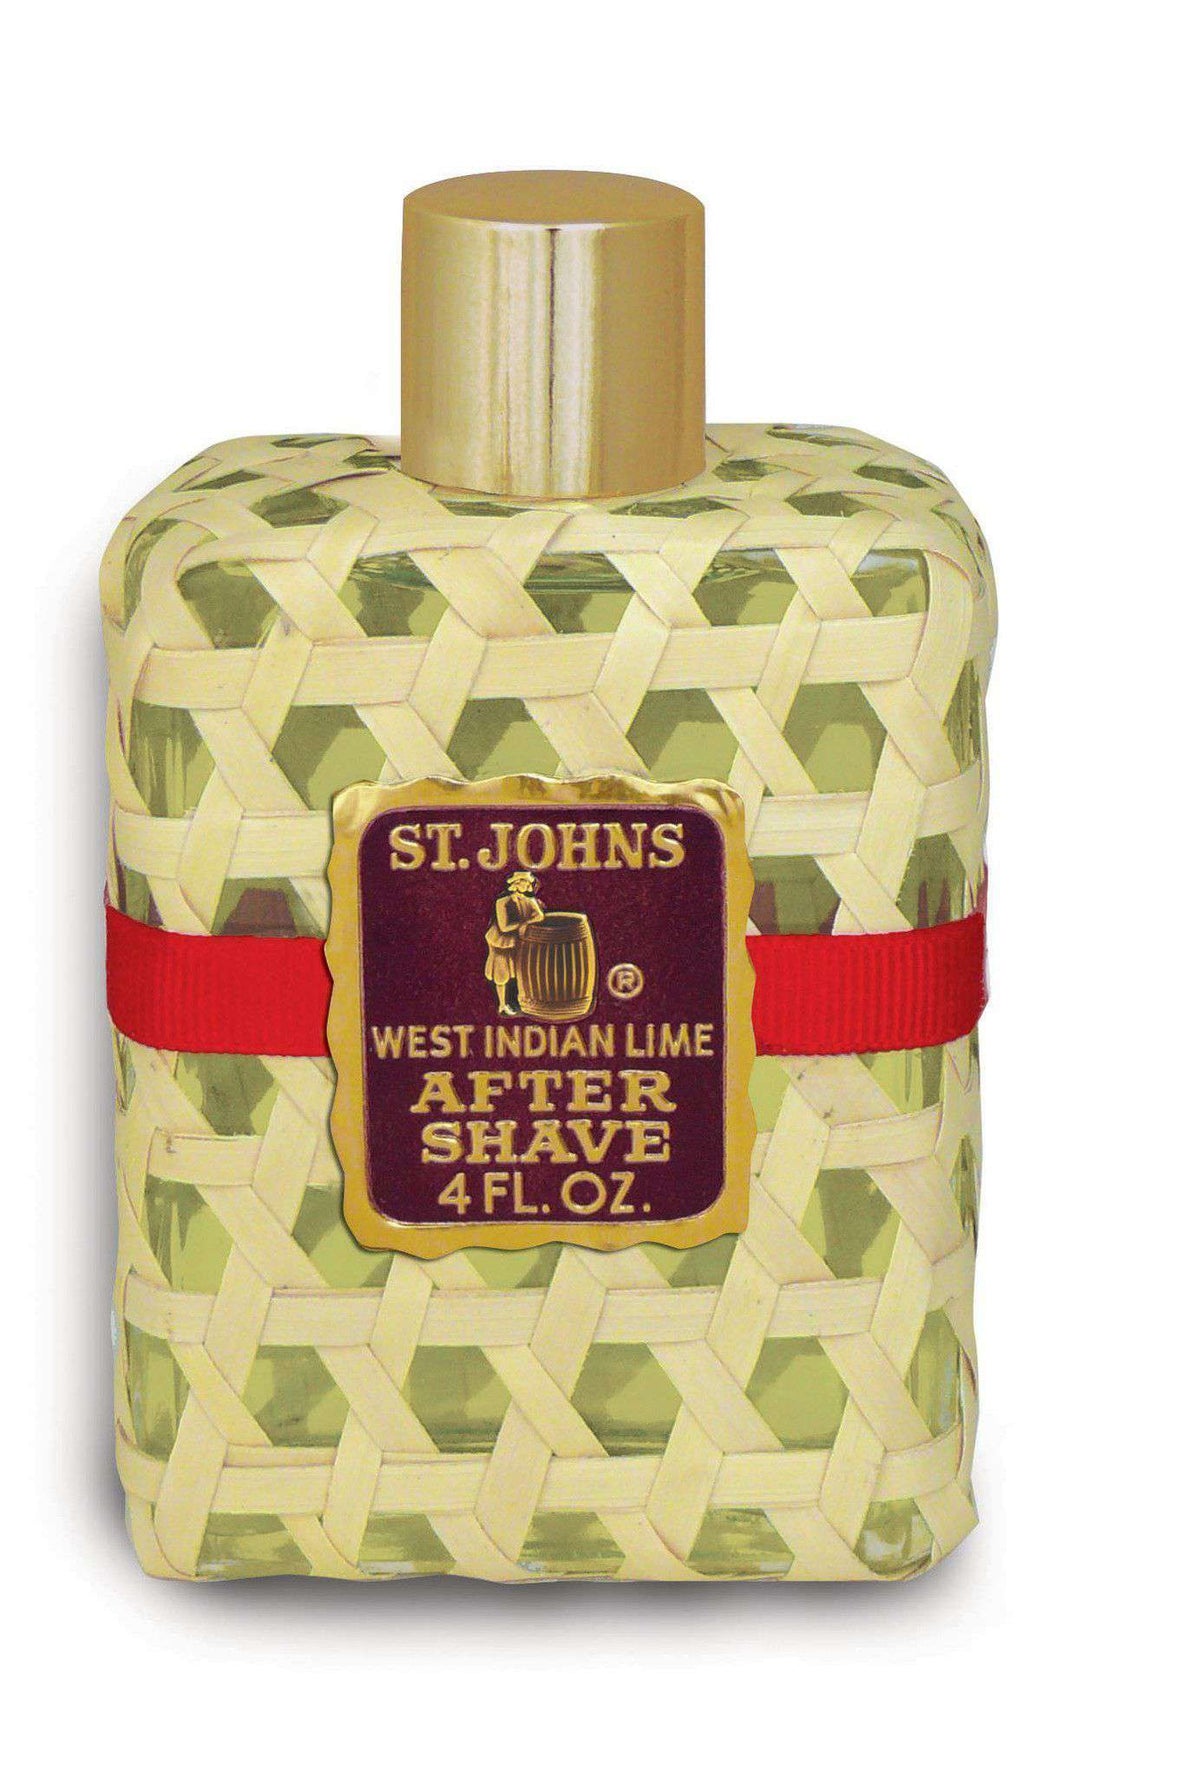 West Indian Lime After Shave by West Indies Bay Company - Country Club Prep